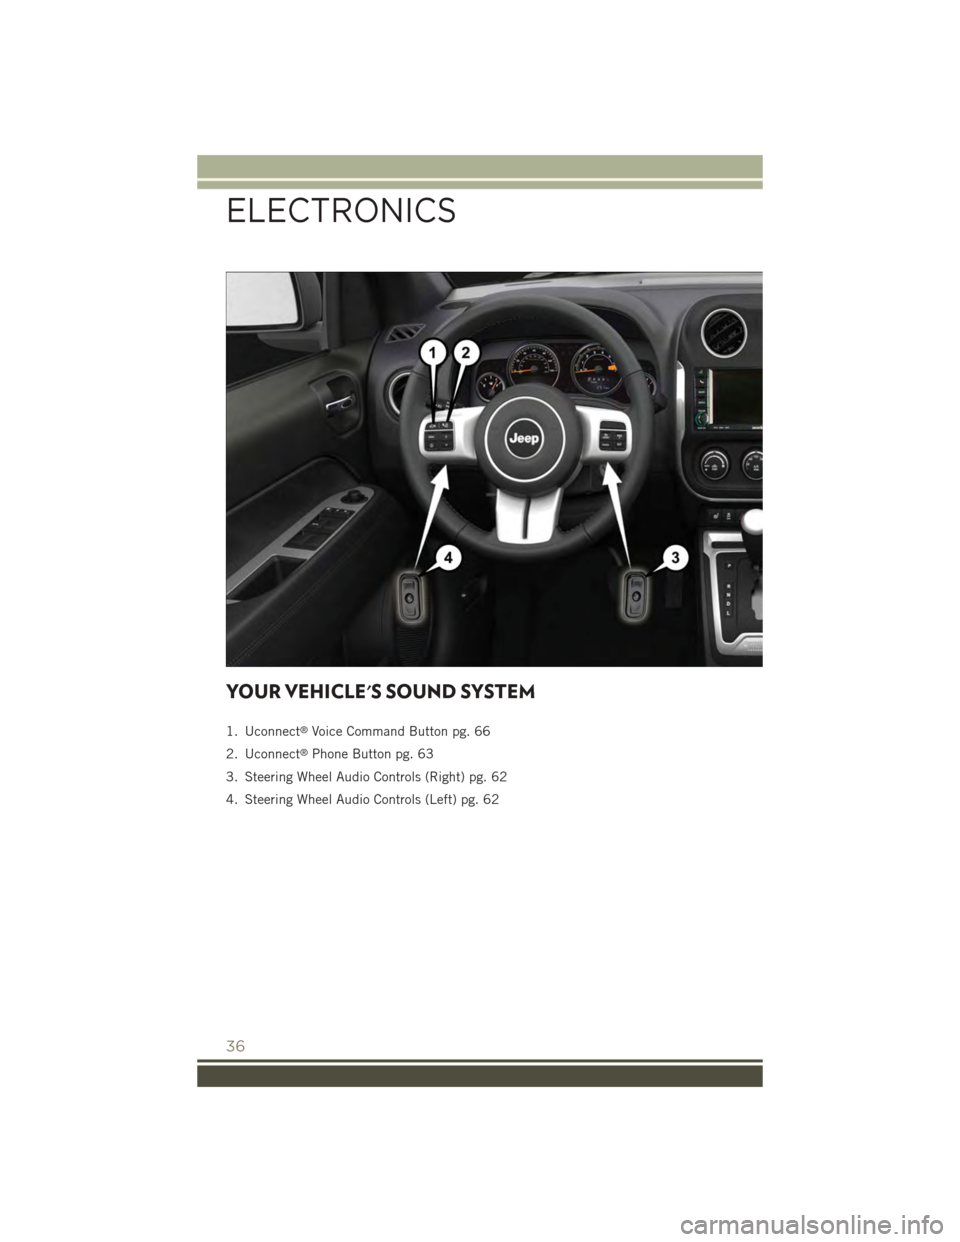 JEEP PATRIOT 2015 1.G User Guide YOUR VEHICLES SOUND SYSTEM
1. Uconnect®Voice Command Button pg. 66
2. Uconnect®Phone Button pg. 63
3. Steering Wheel Audio Controls (Right) pg. 62
4. Steering Wheel Audio Controls (Left) pg. 62
ELE